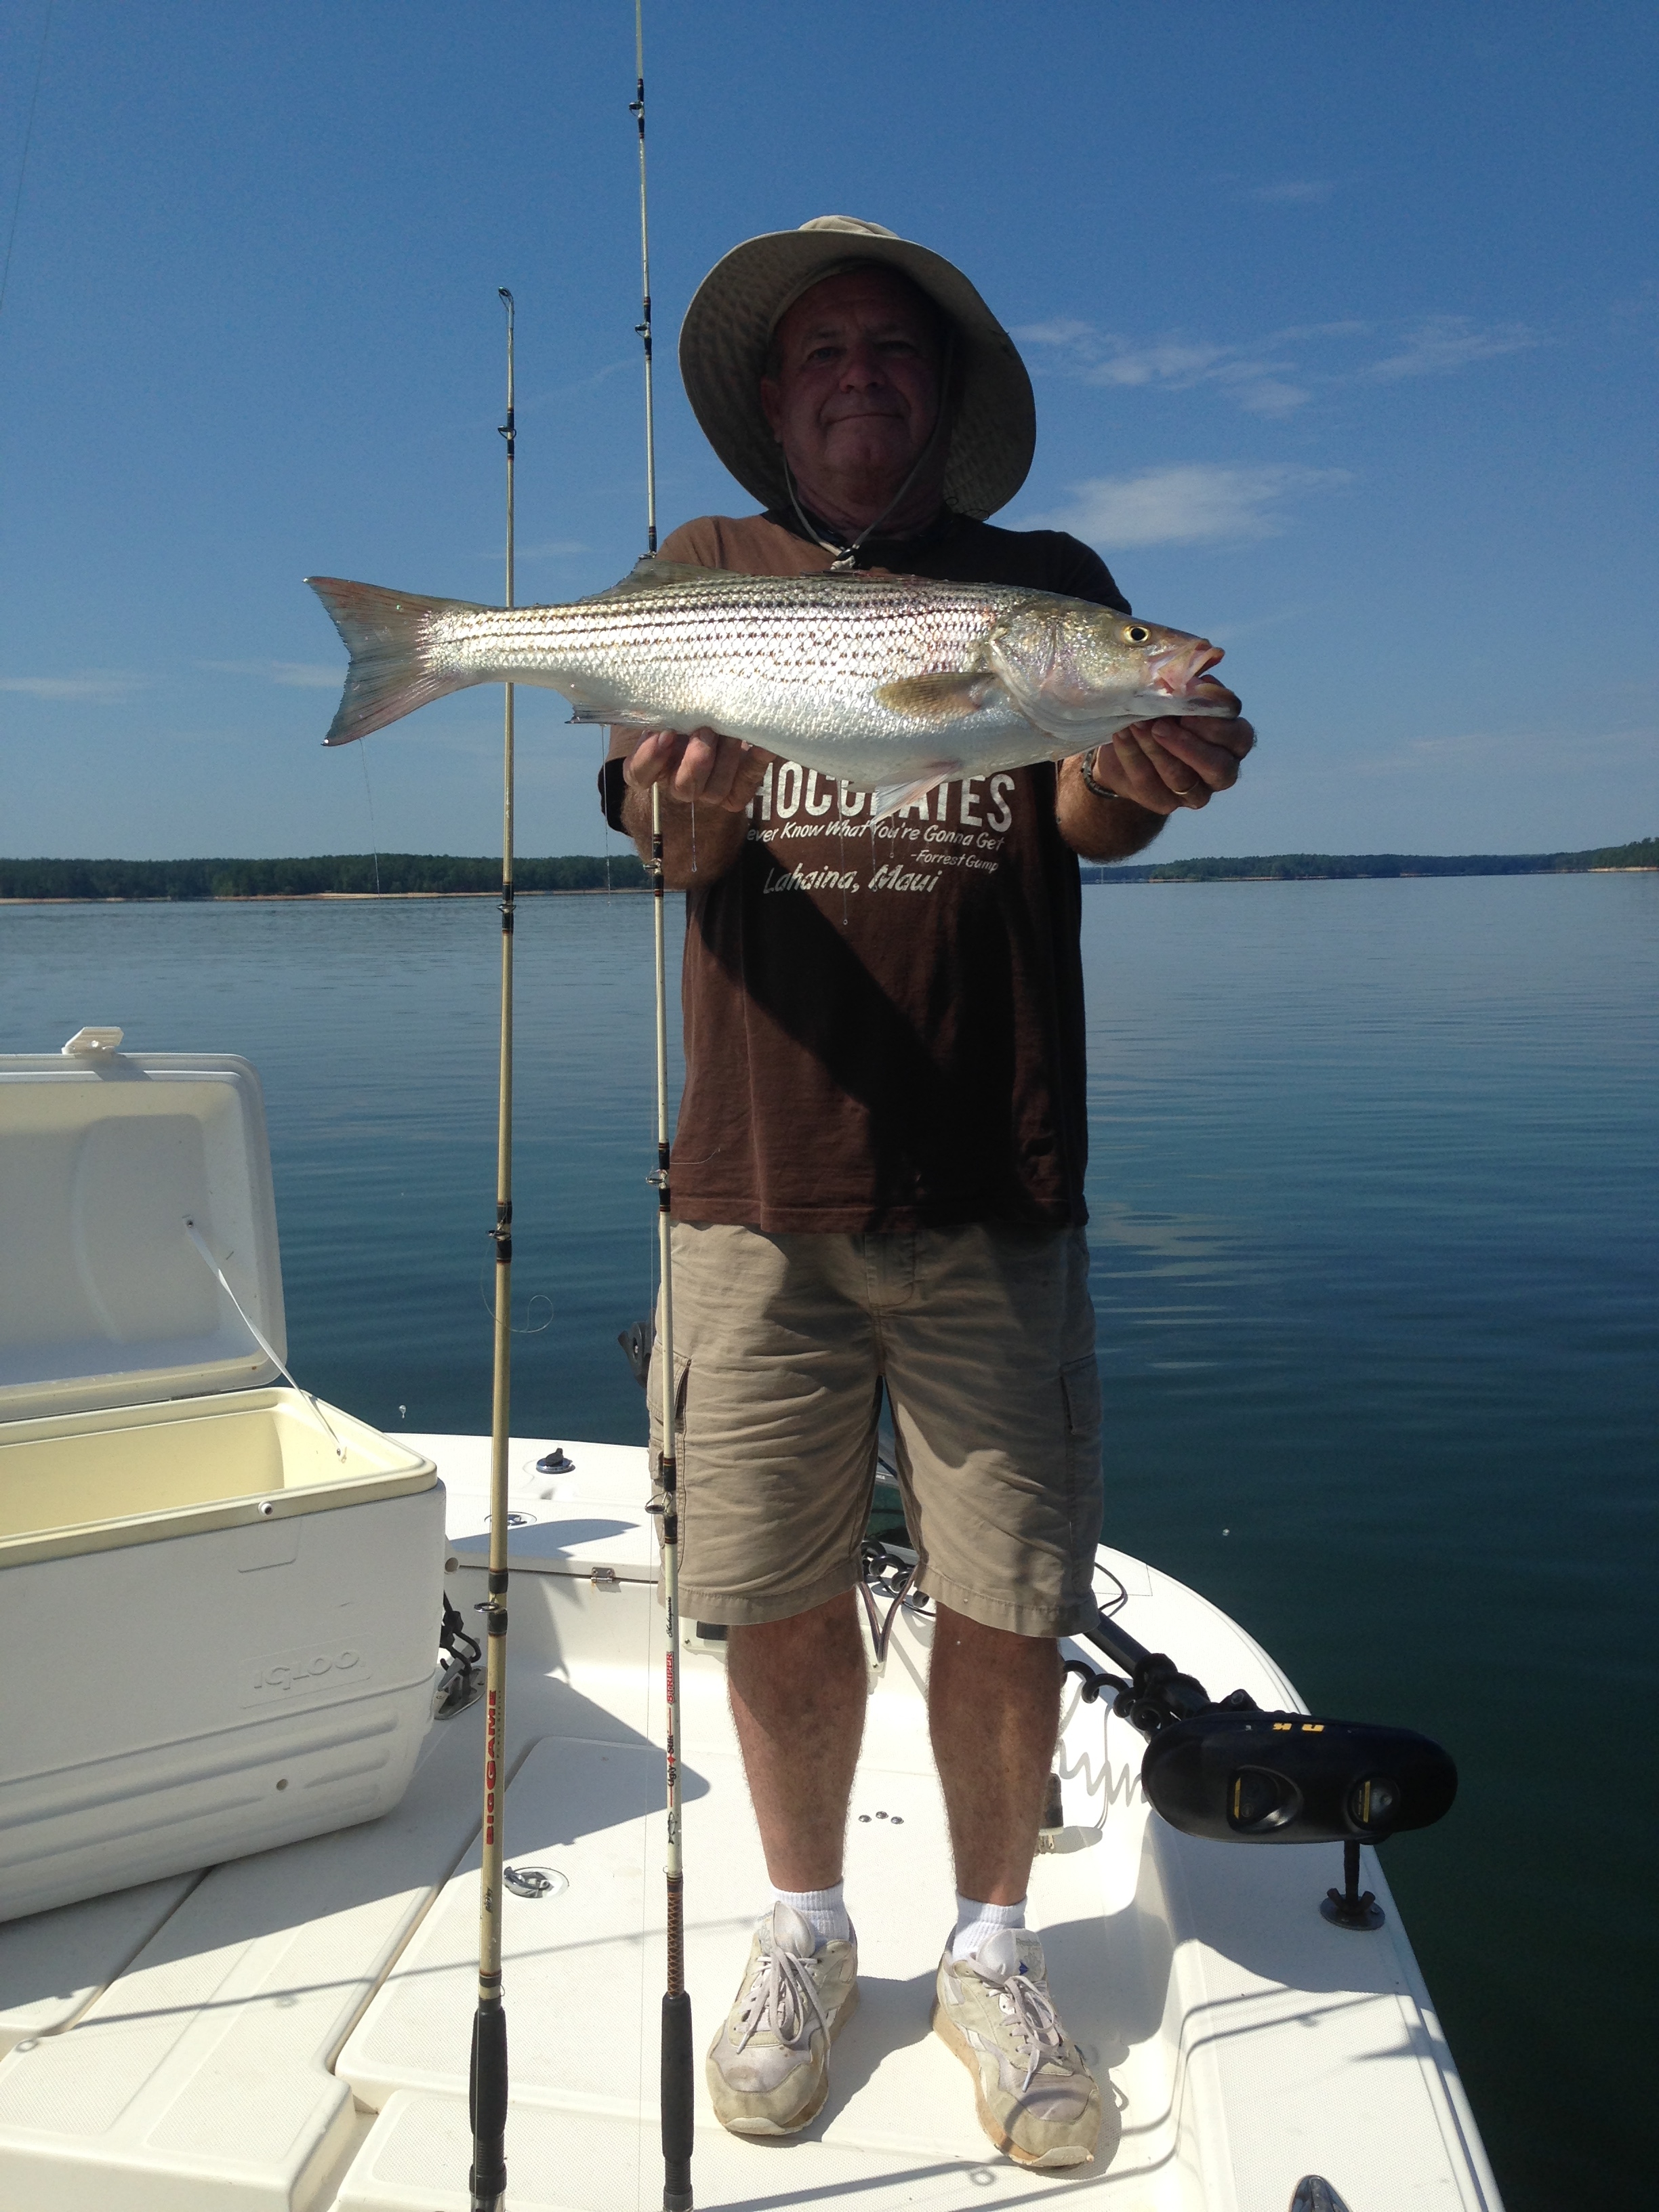 Captain Billy with his 8 lbs striper